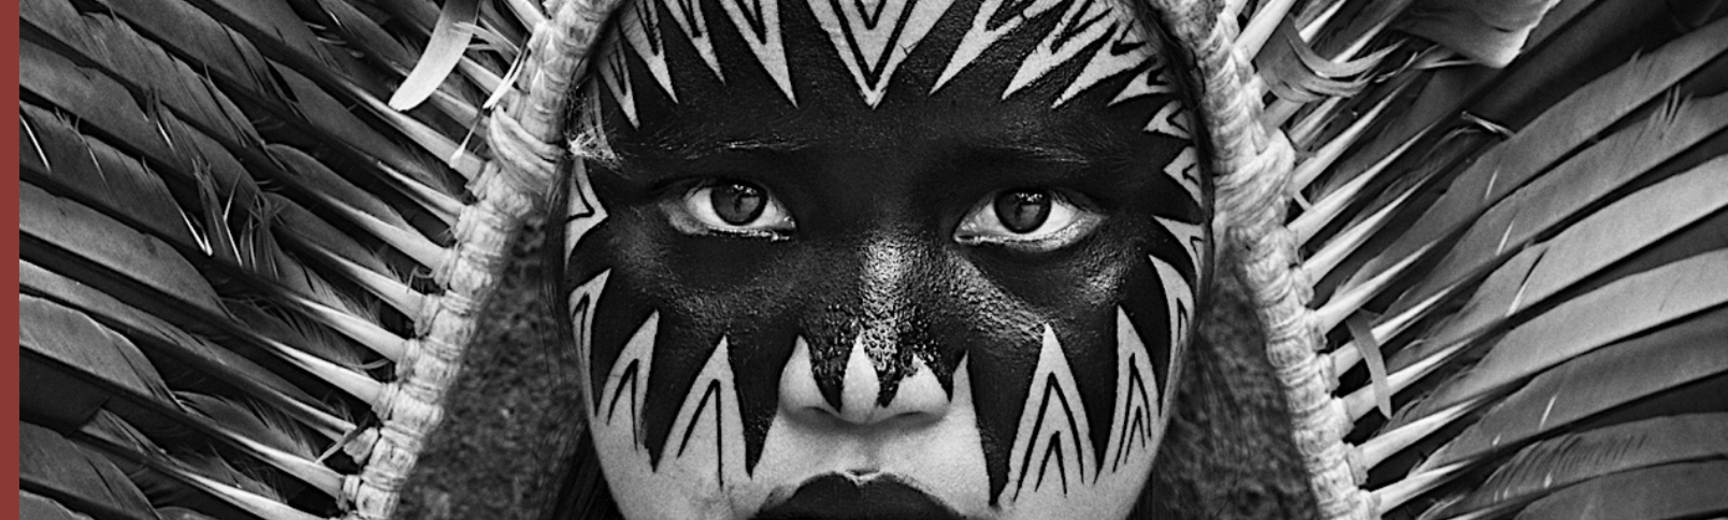 Black and white photo of woman with ornately painted face and feather headdress